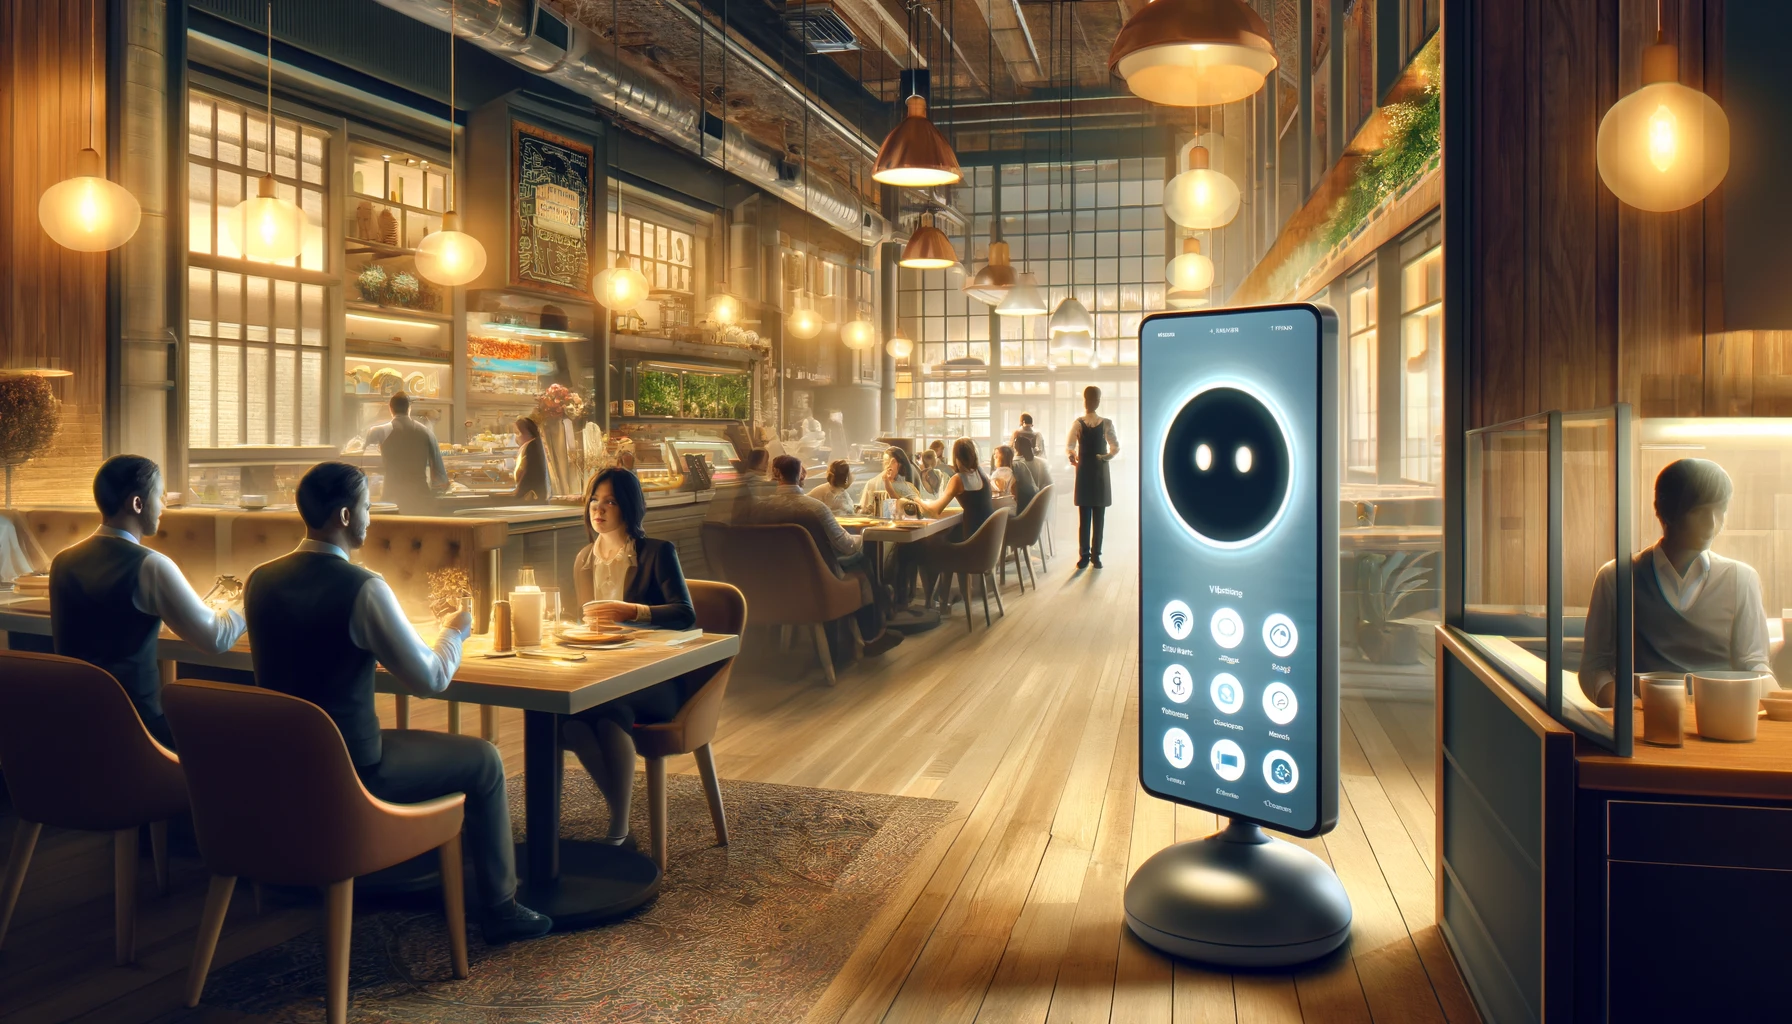 illustration for the article about the restaurant chain using an AI voice assistant. This version features a more realistic and cooler toned setting with a digital panel used as the AI assistant, subtly integrated into the sophisticated restaurant environment. The panel is designed to look practical and modern, enhancing the dining experience while managing phone calls efficiently.